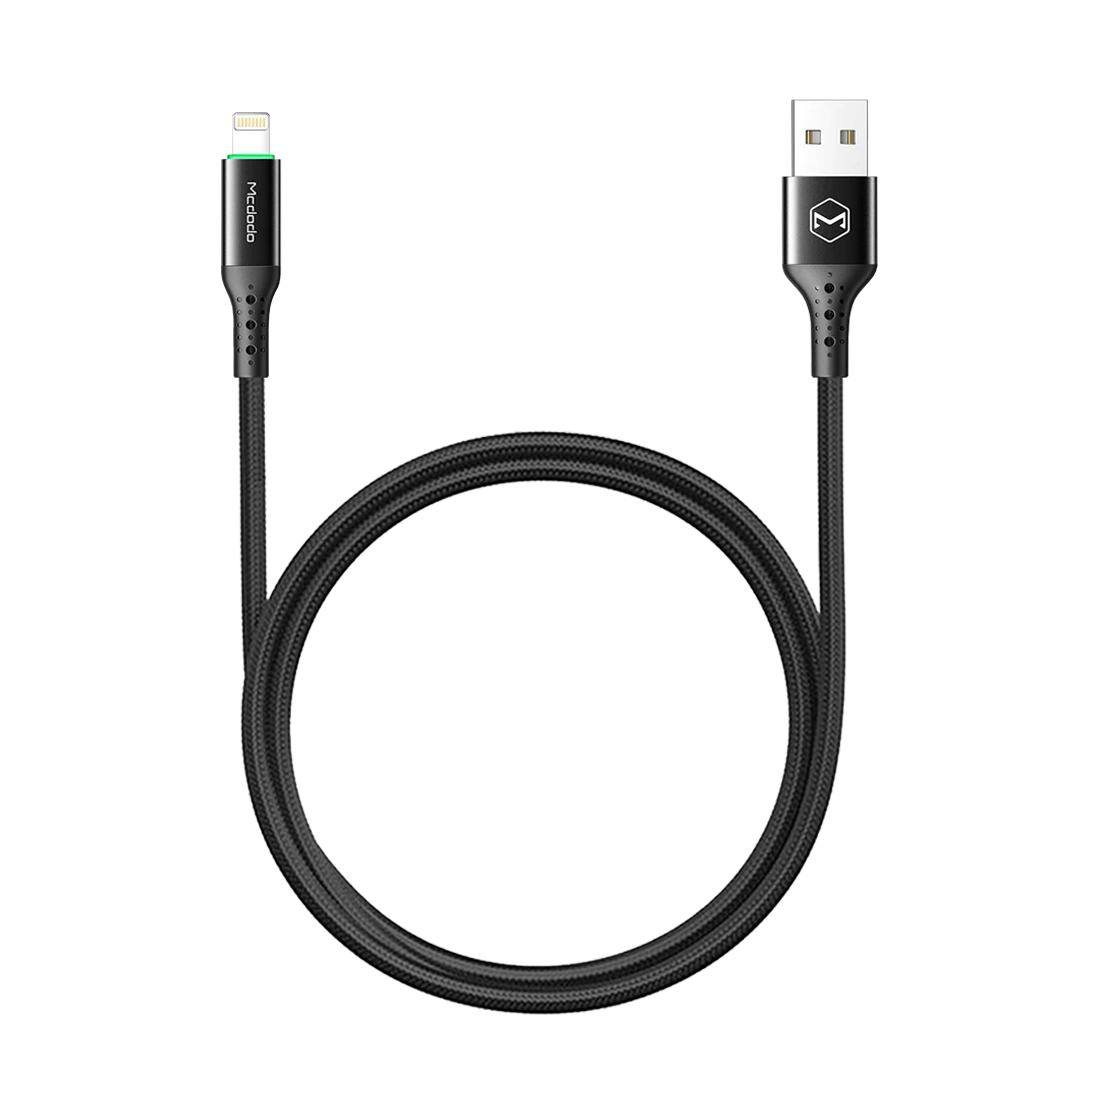 Mcdodo Charge Cable USB to Lightning 1.2m CA-7410